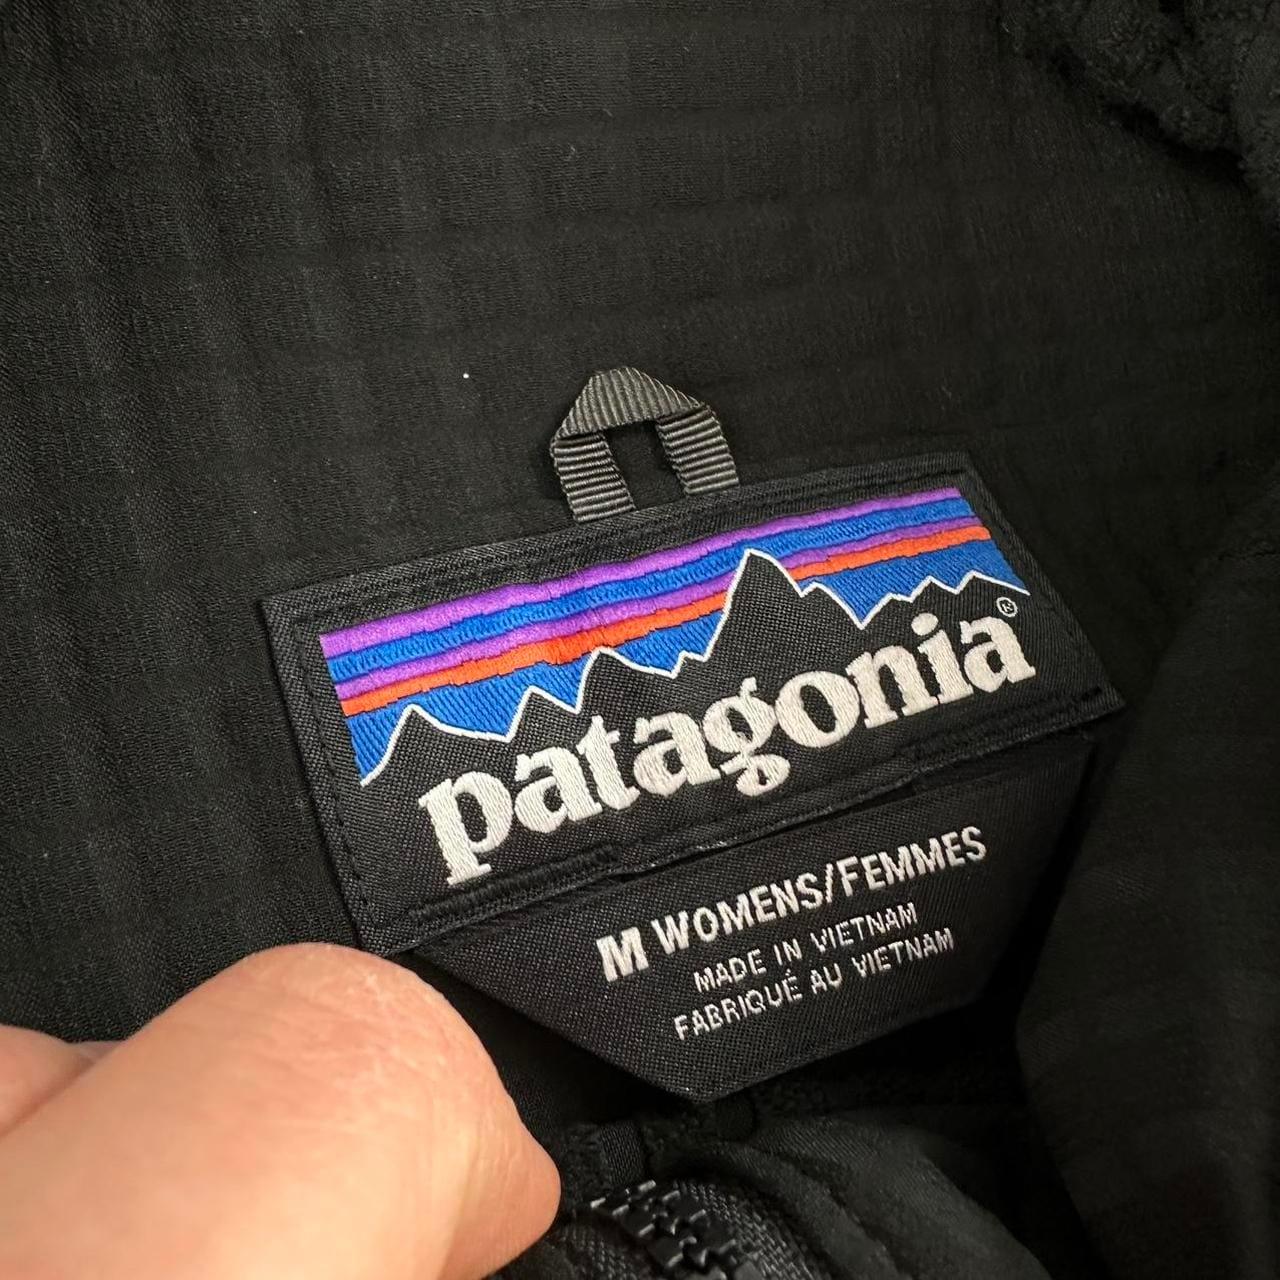 Patagonia zip grid jacket woman’s size S - Known Source